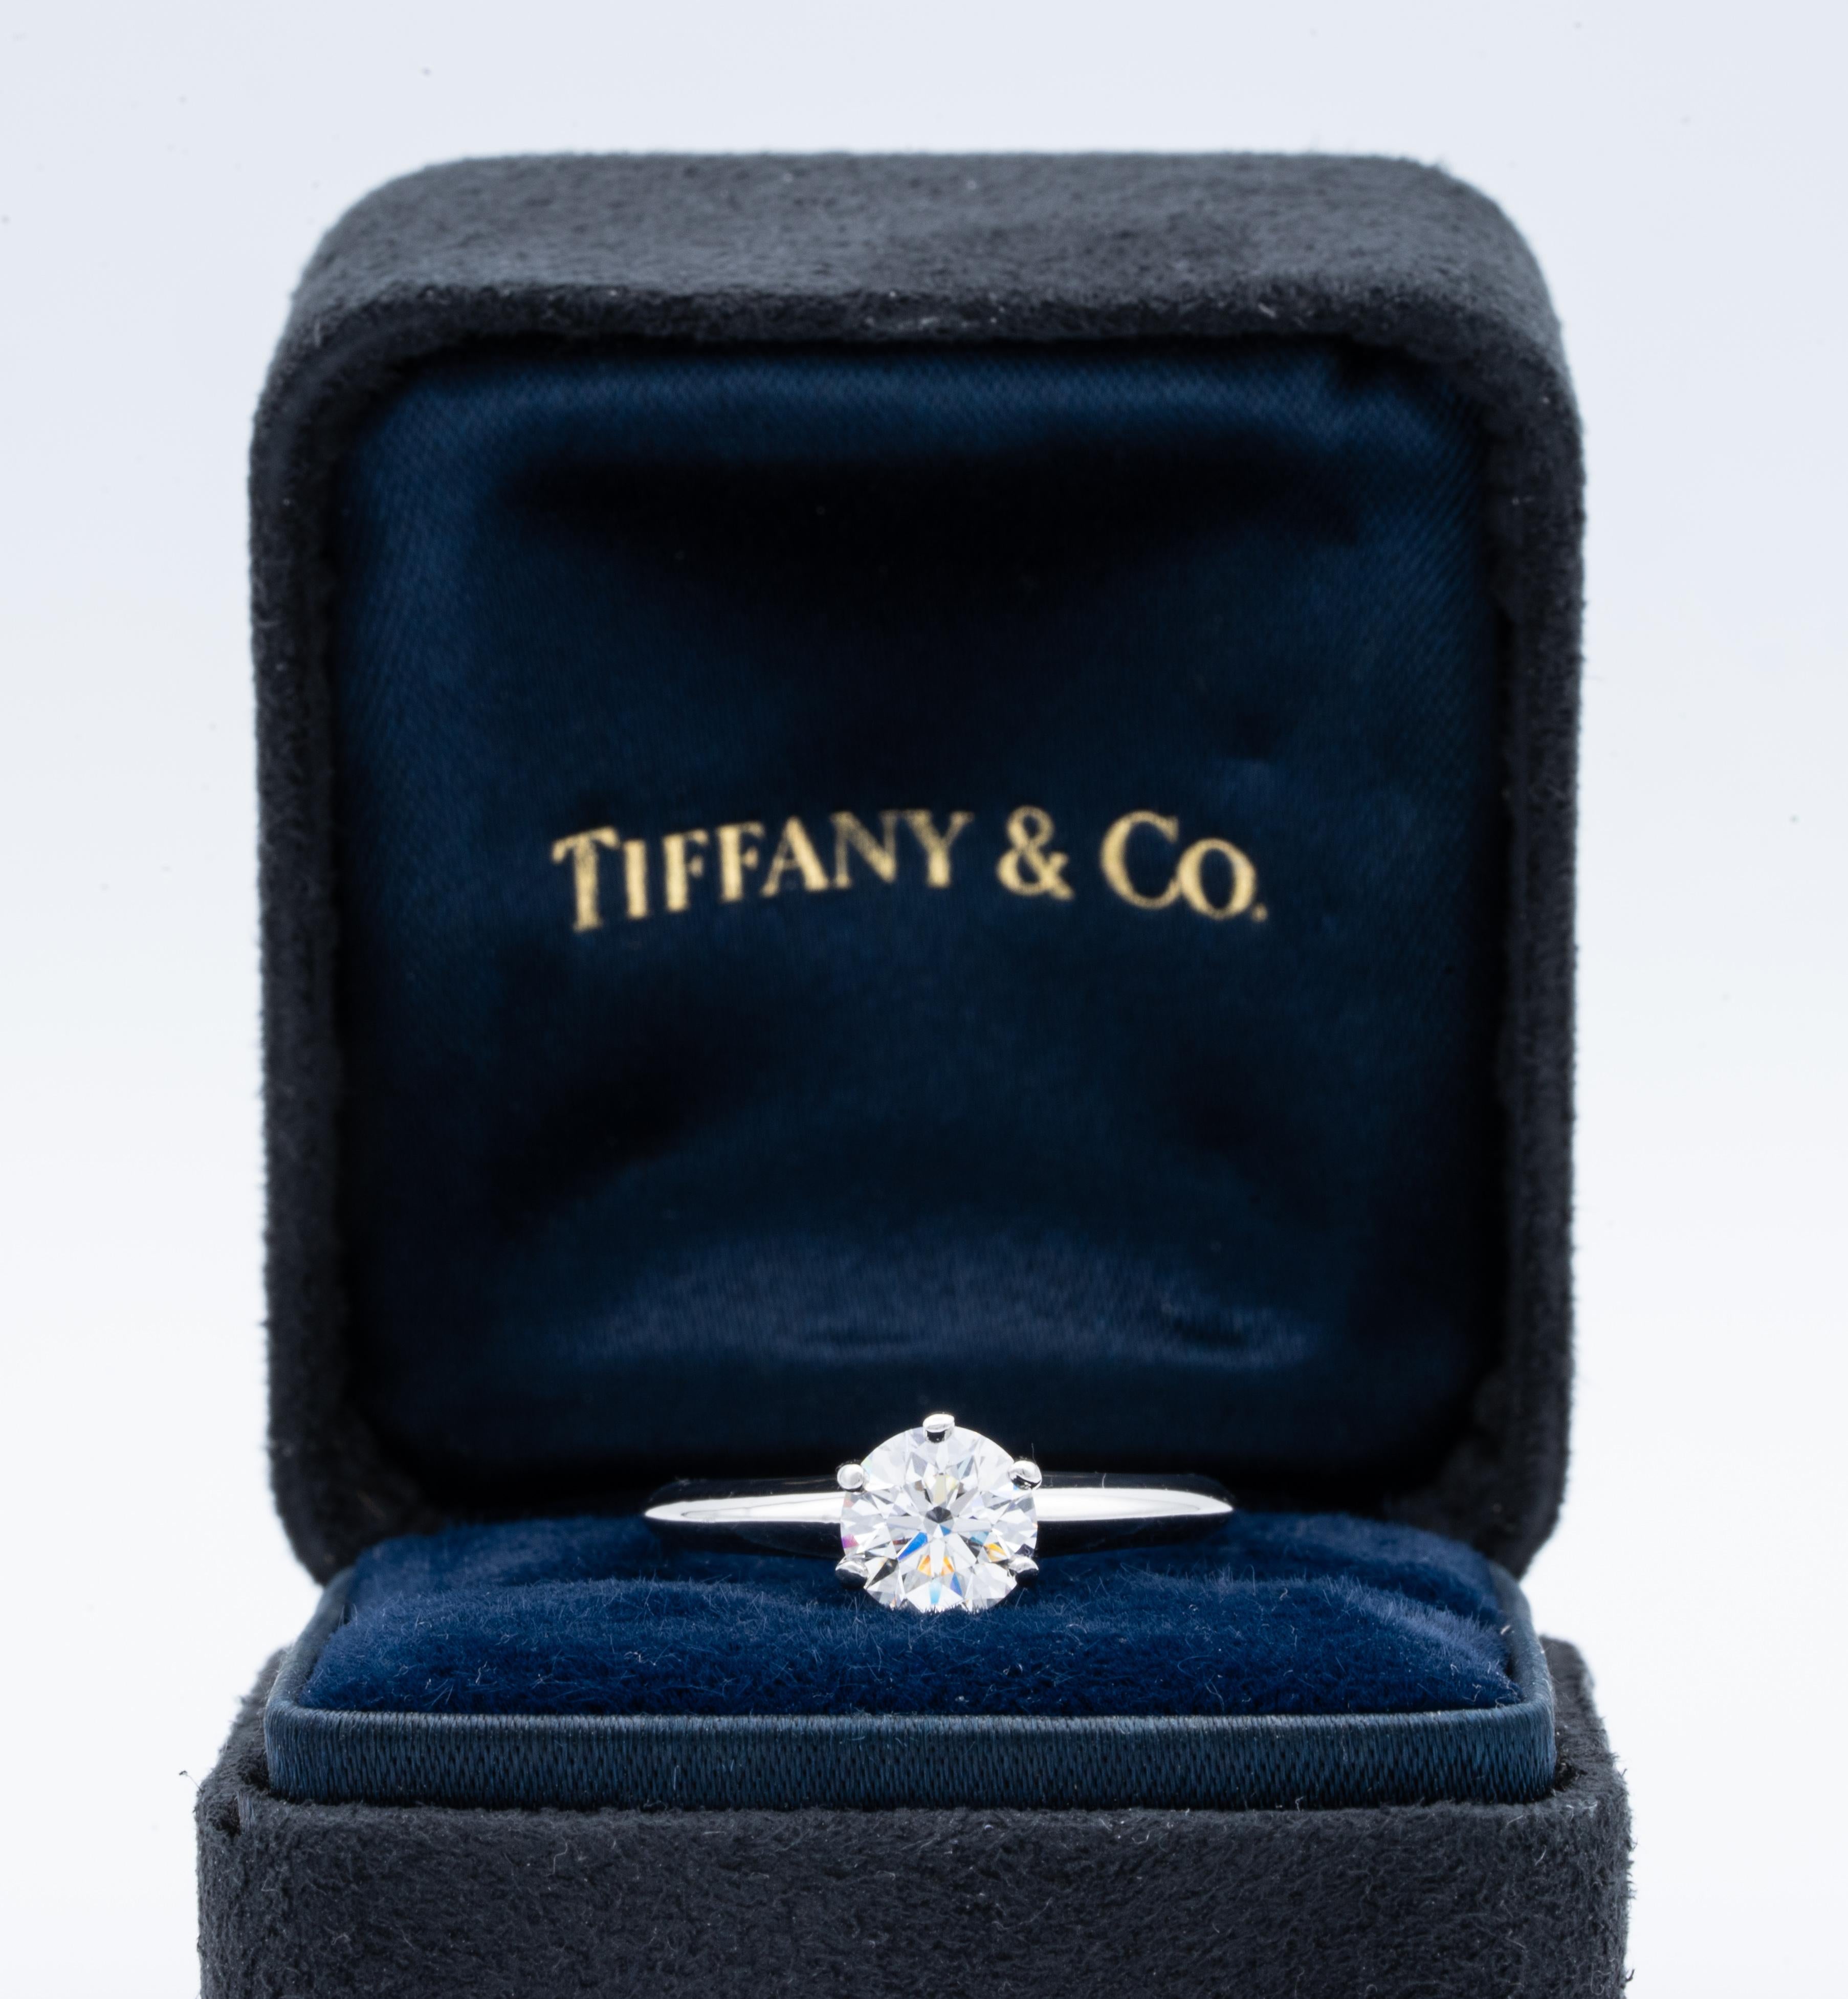 Tiffany & Co Round Brilliant Solitaire Engagement Ring featuring a 1.06 ct Center G  color, VVS2 clarity, finely crafted in a 6 prong Platinum Mounting. This diamond Includes a GIA certificate with report number 13333037 and a grading of G color and